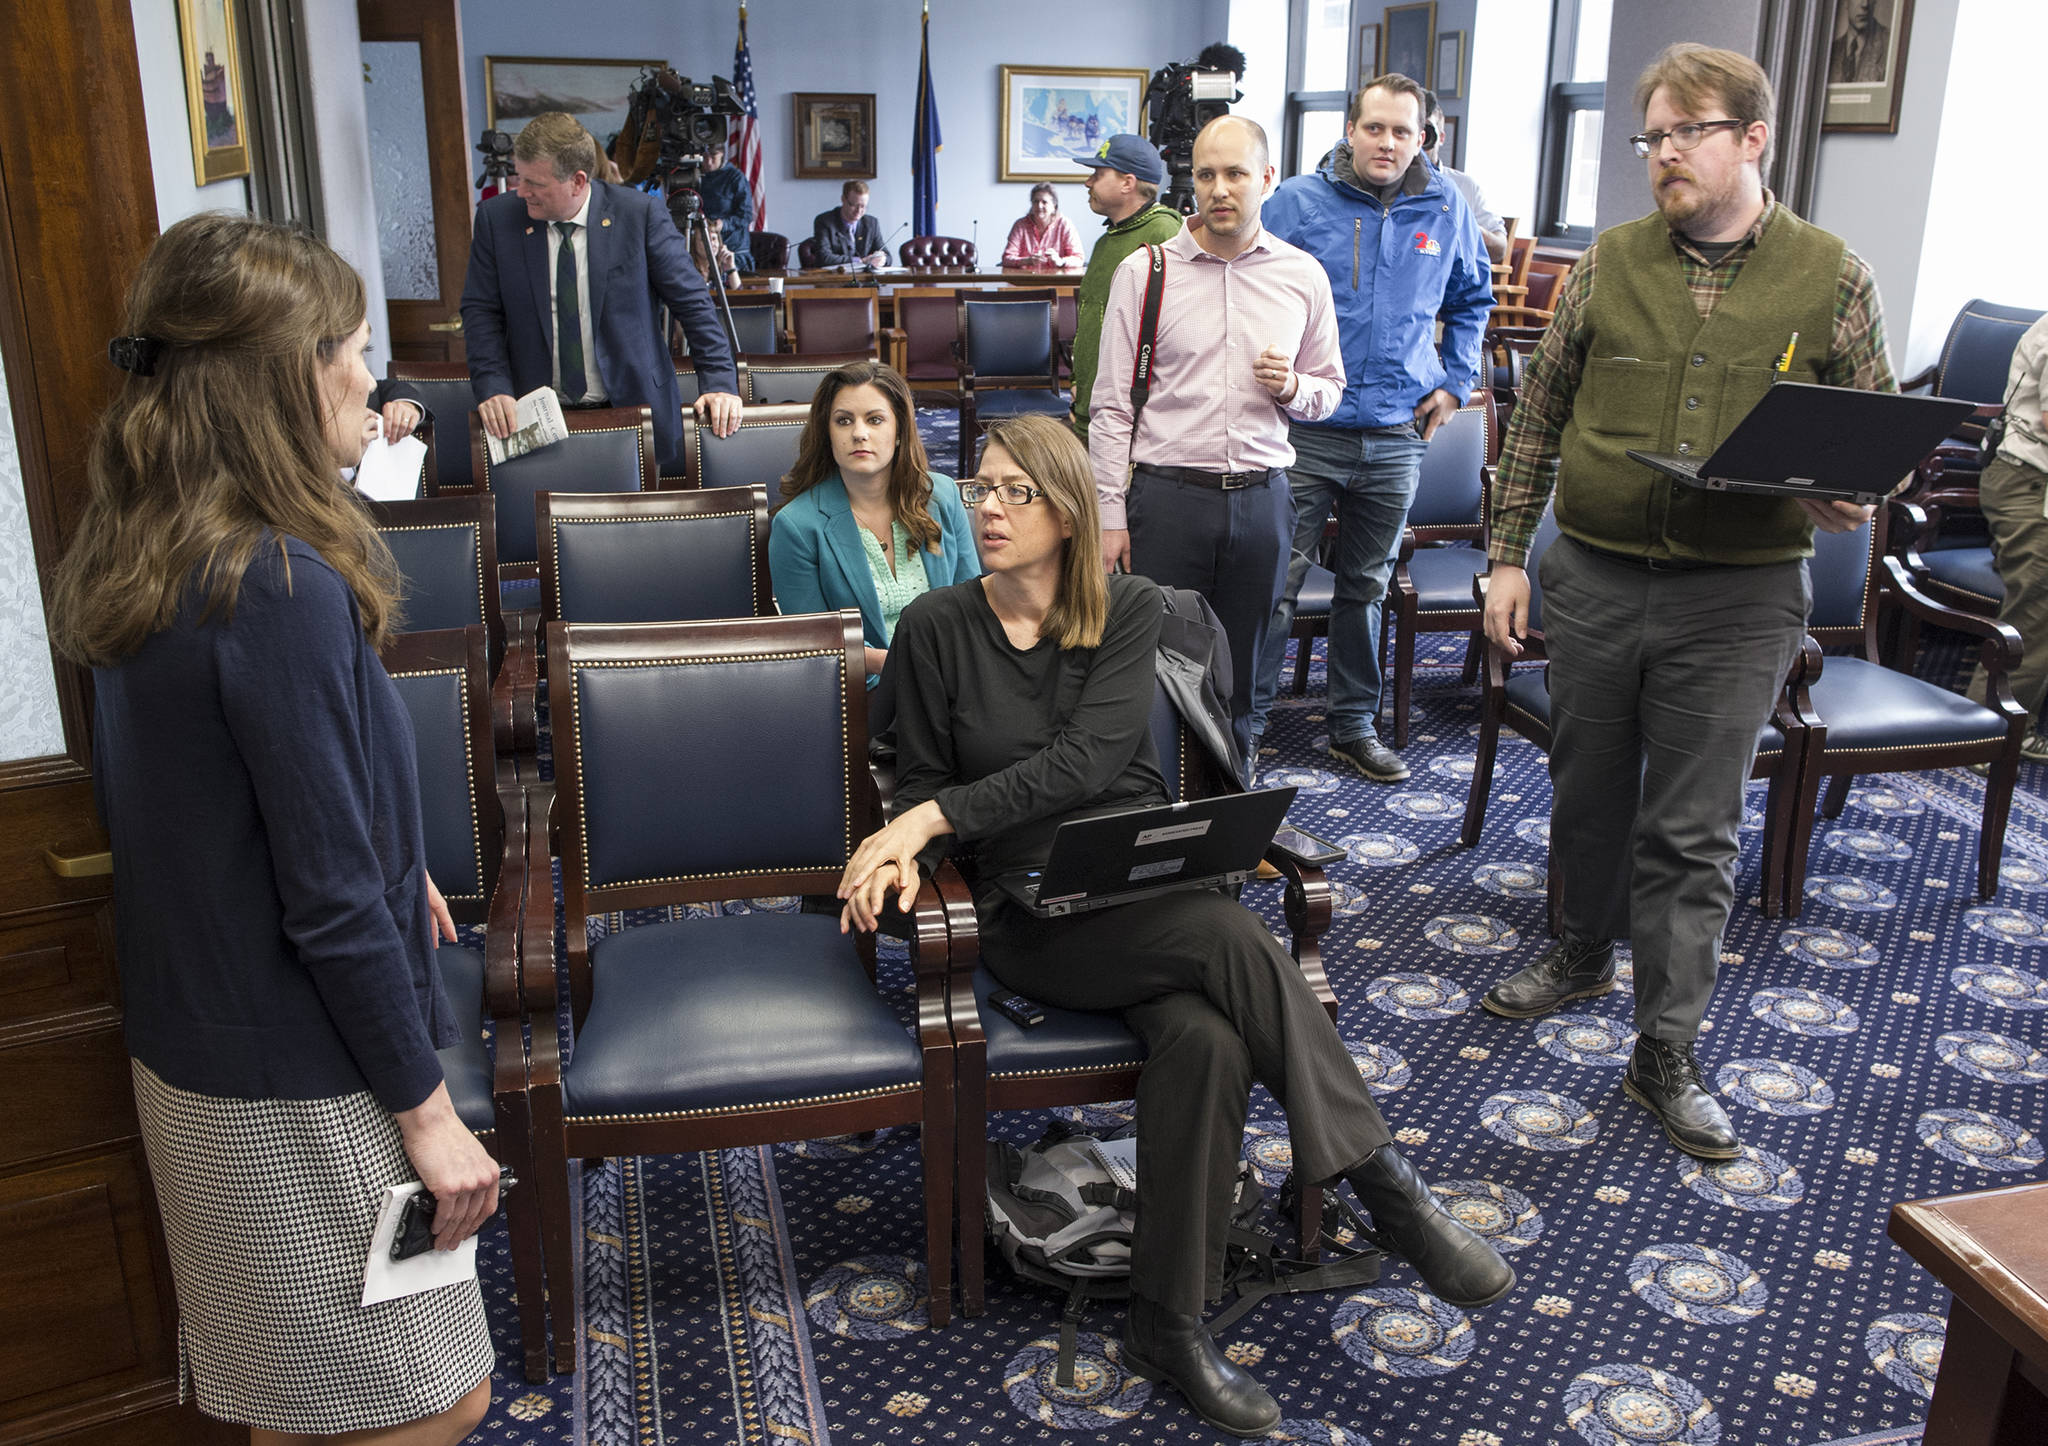 Rena Miller, communications director for the Senate Majority Caucus, left, tells Alaska reporters that a press conference called by the Caucus has been cancelled at the Capitol on Friday, June 2, 2017. (Michael Penn | Juneau Empire)